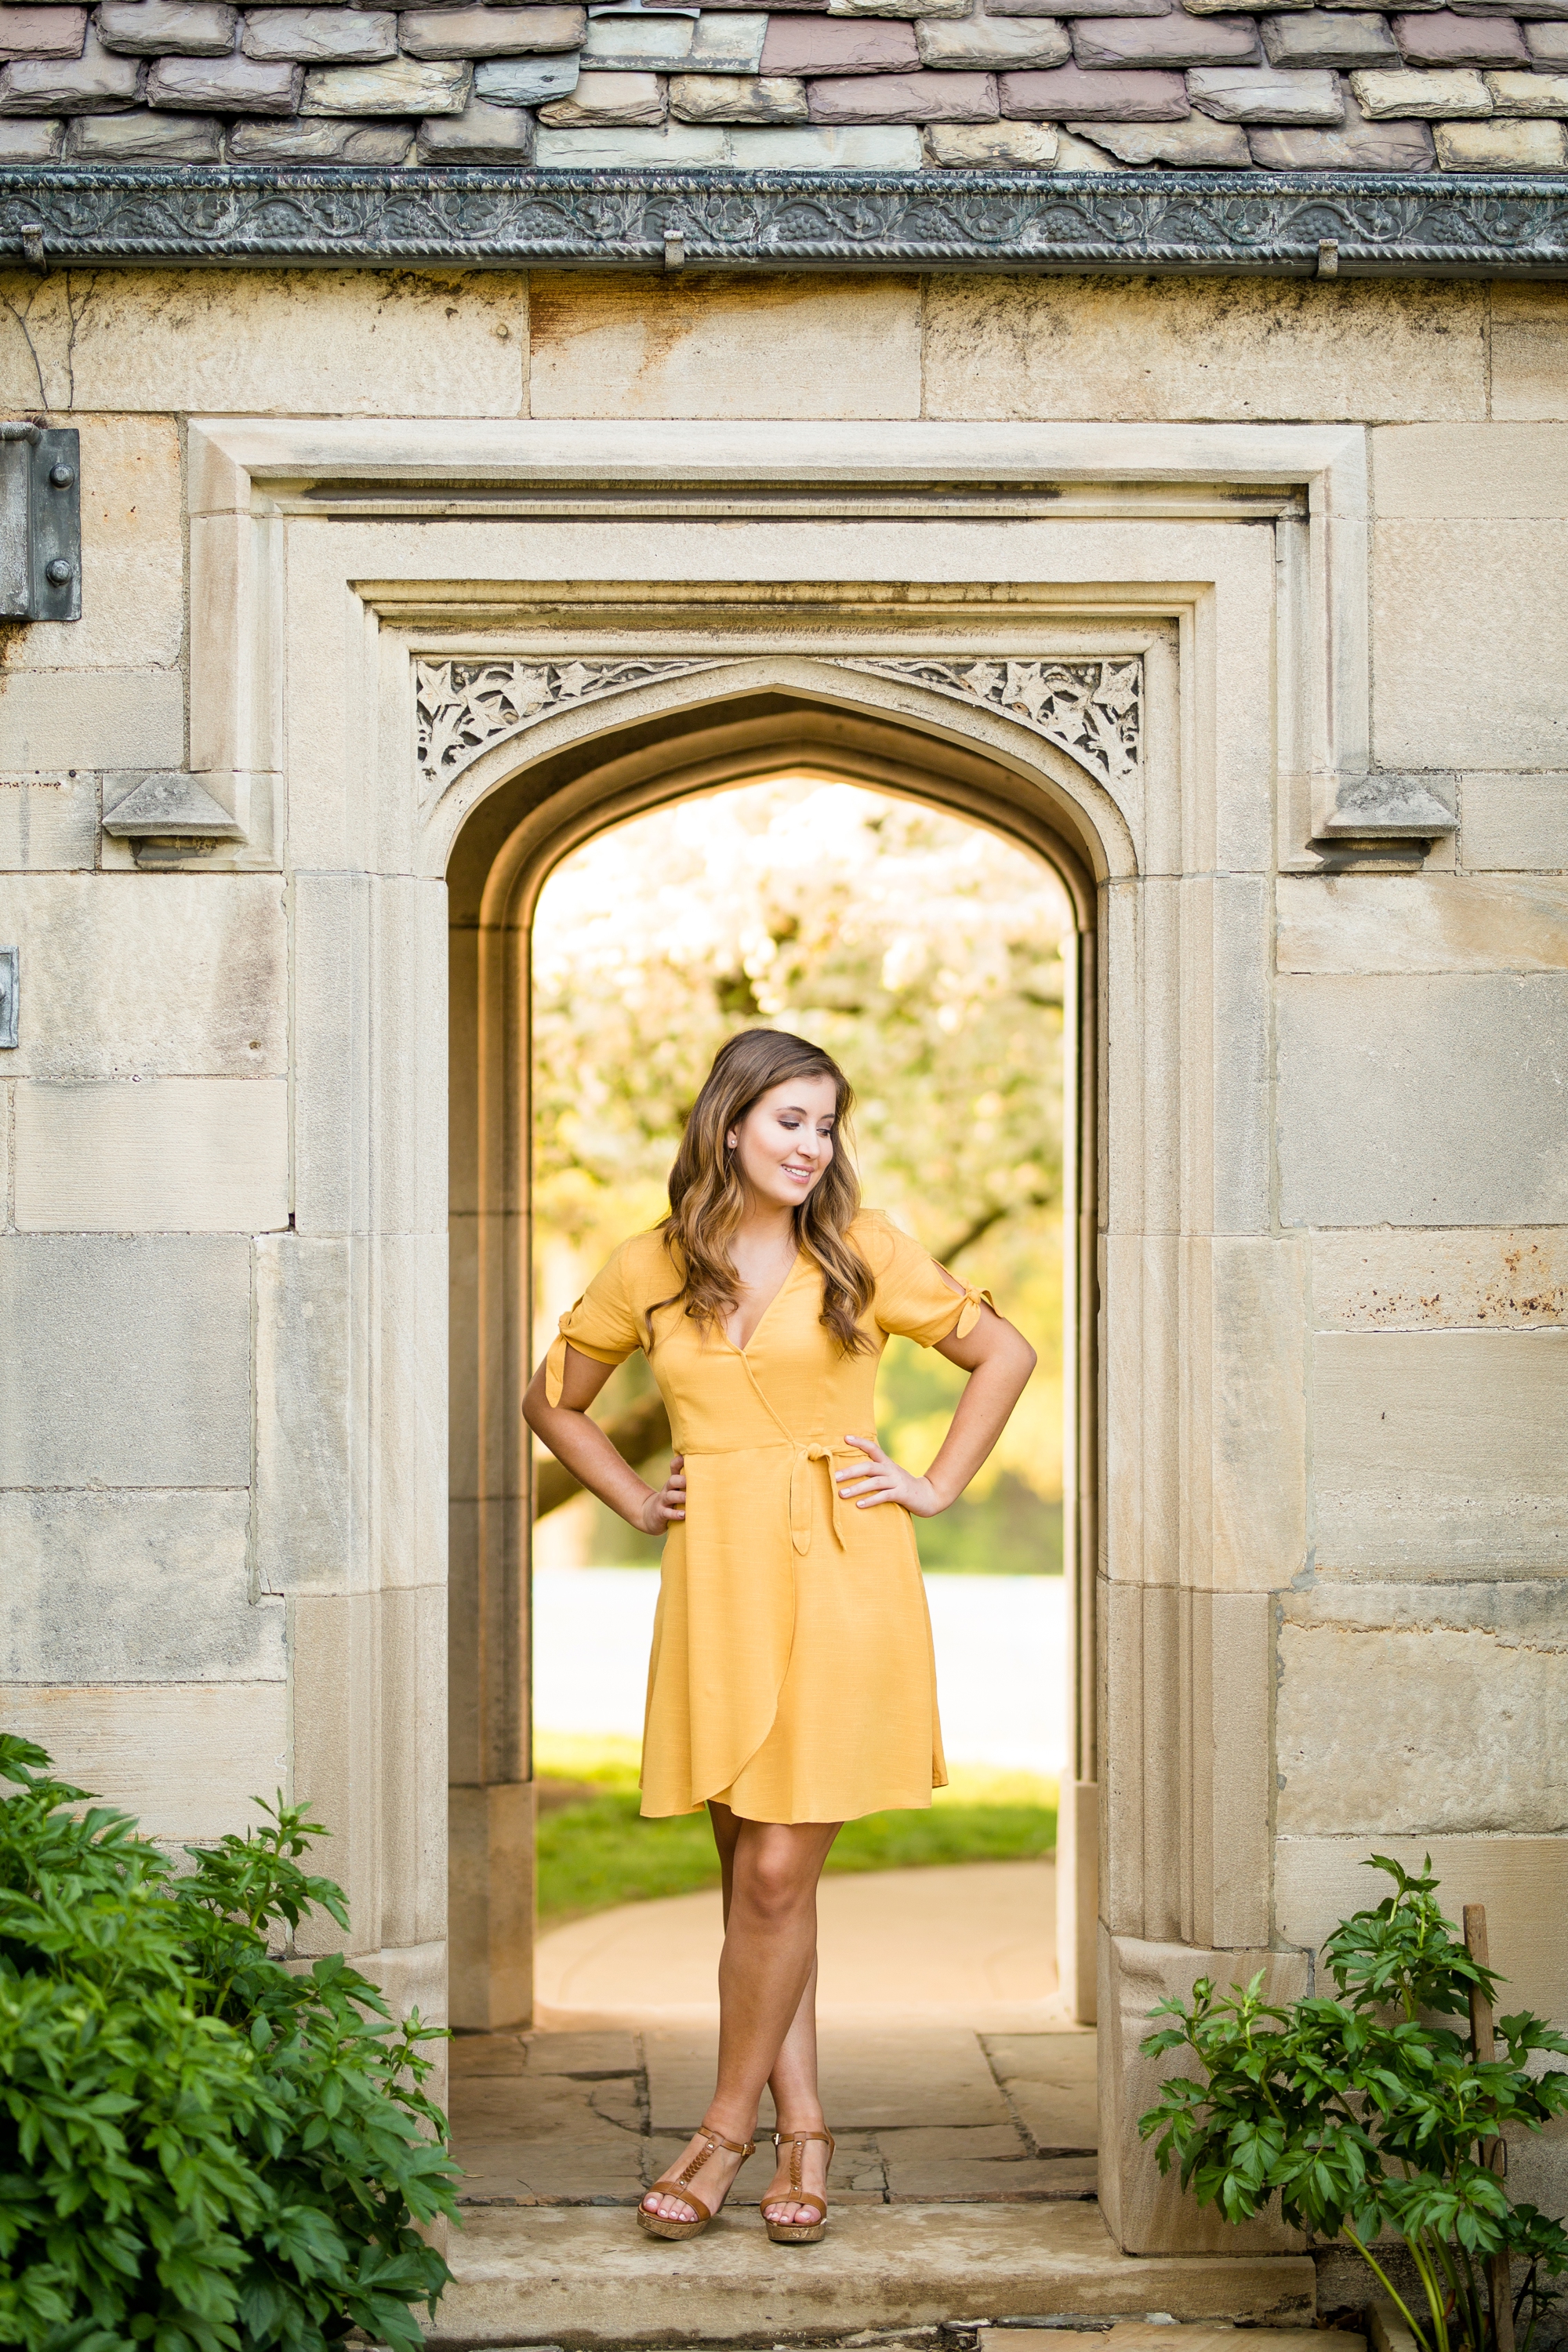 hartwood acres senior photos, best places for senior photos in pittsburgh, best locations for senior photos in pittsburgh, hartwood acres senior pictures, pittsburgh senior photographer